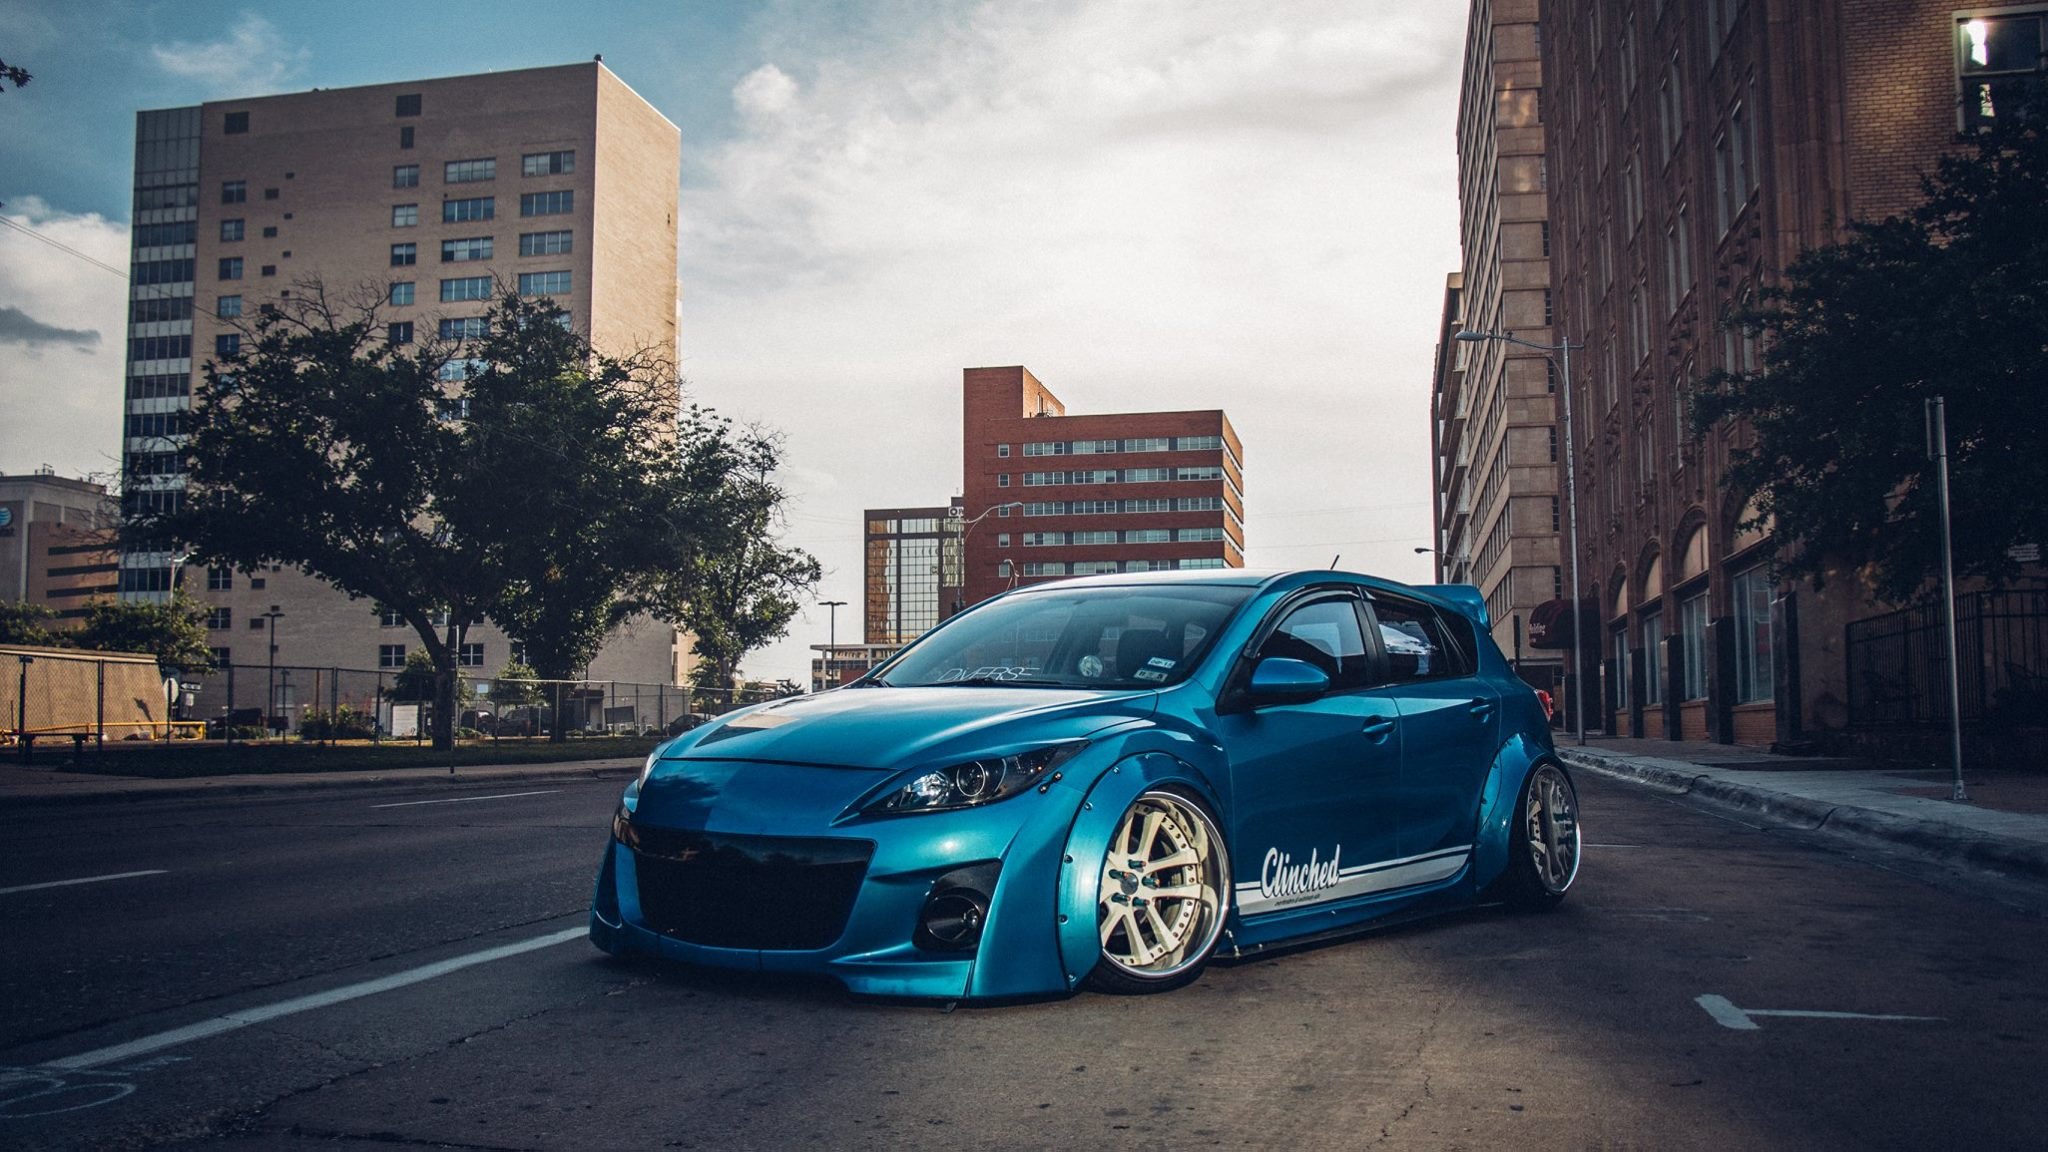 Clinched Body Kit on Blue Mazda 3 - Photo by Clinched